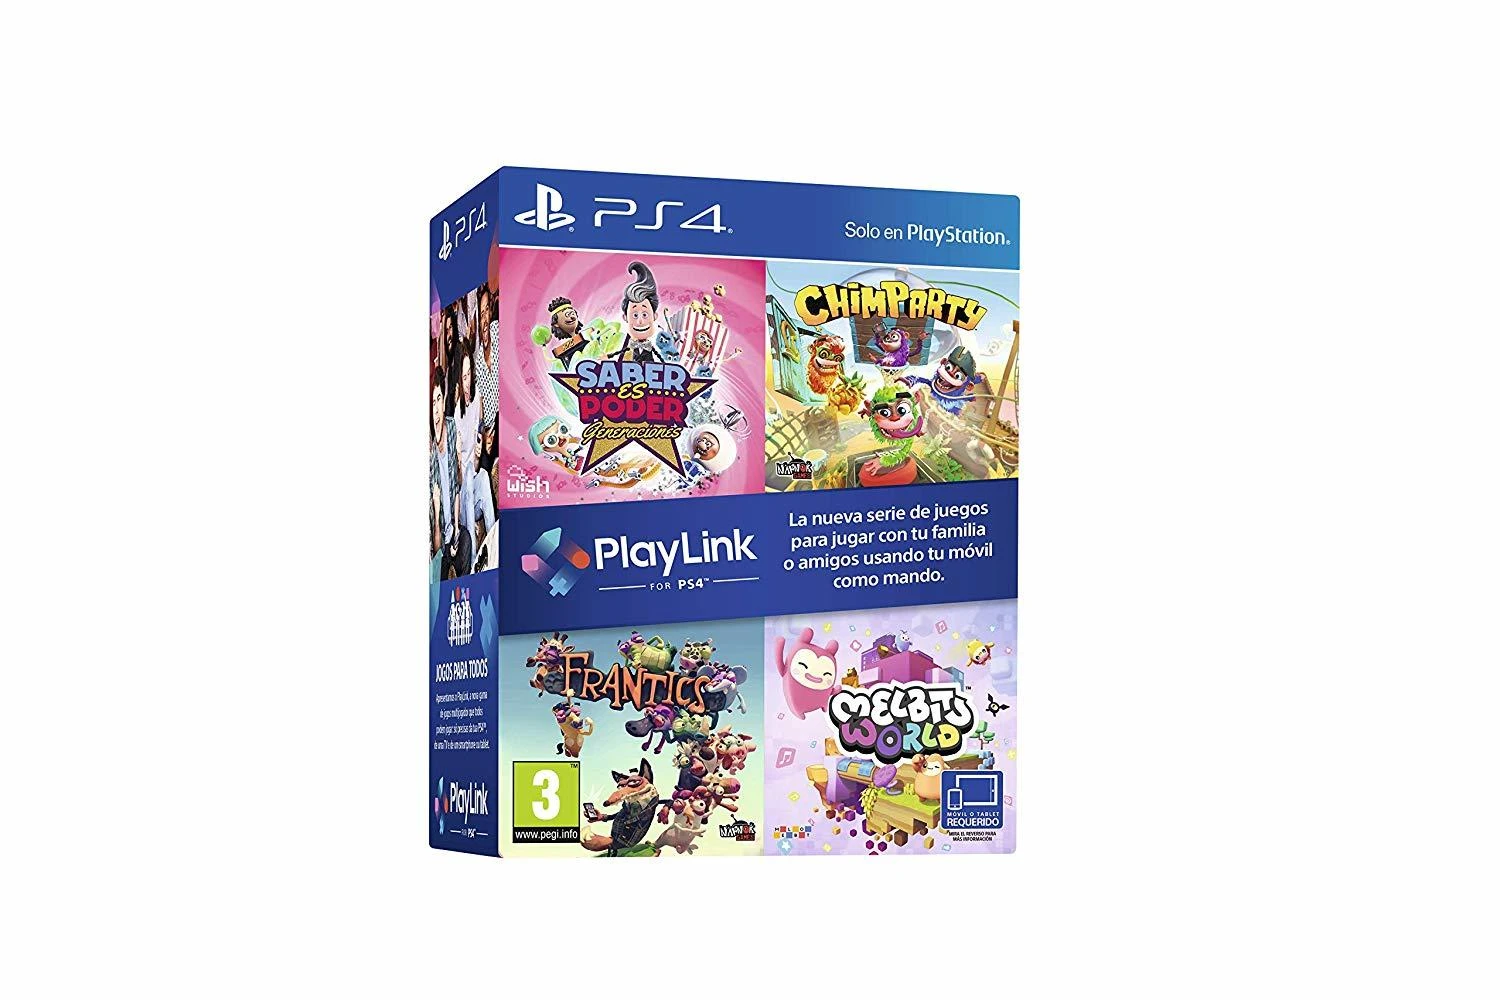 Playlink Know is + Chimparty + Frantics + Melbi games Playstation 4 Fox Ps4 skill|Game AliExpress